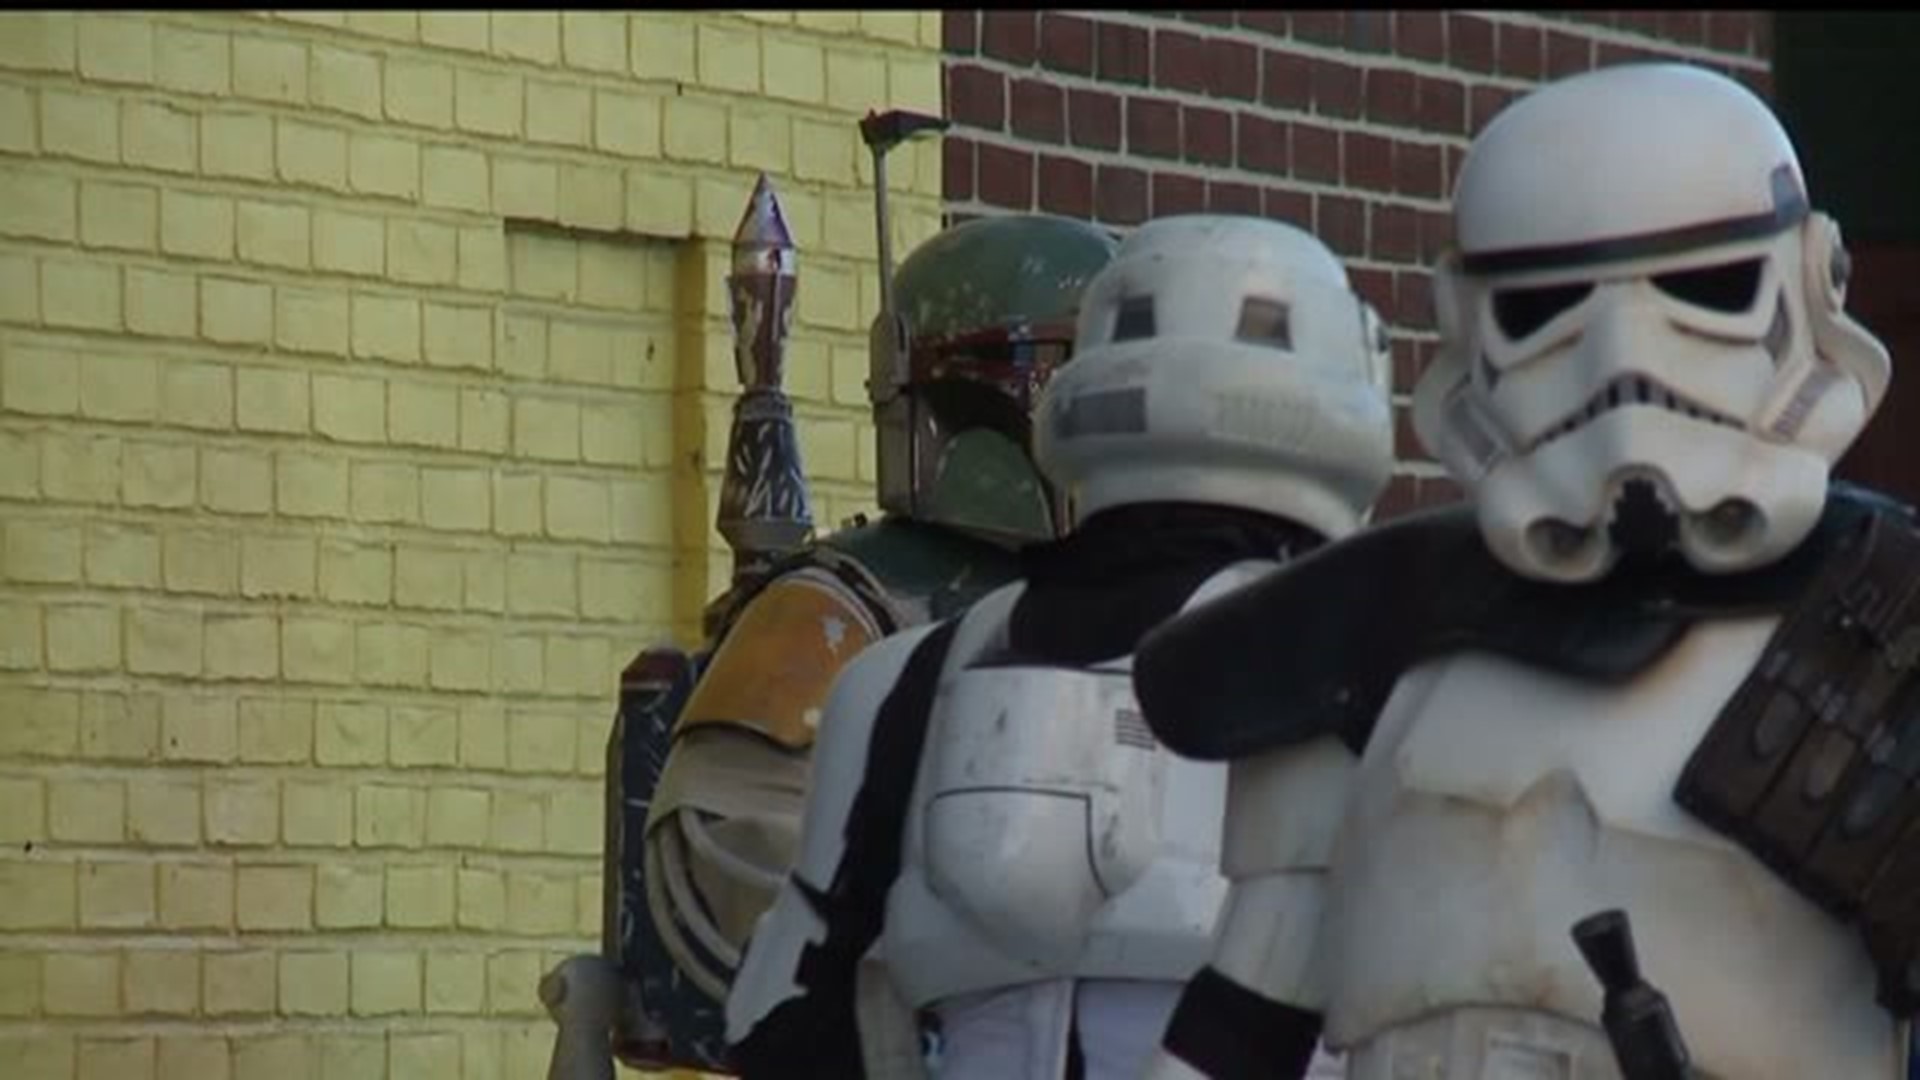 Science Factory hosts Star Wars event